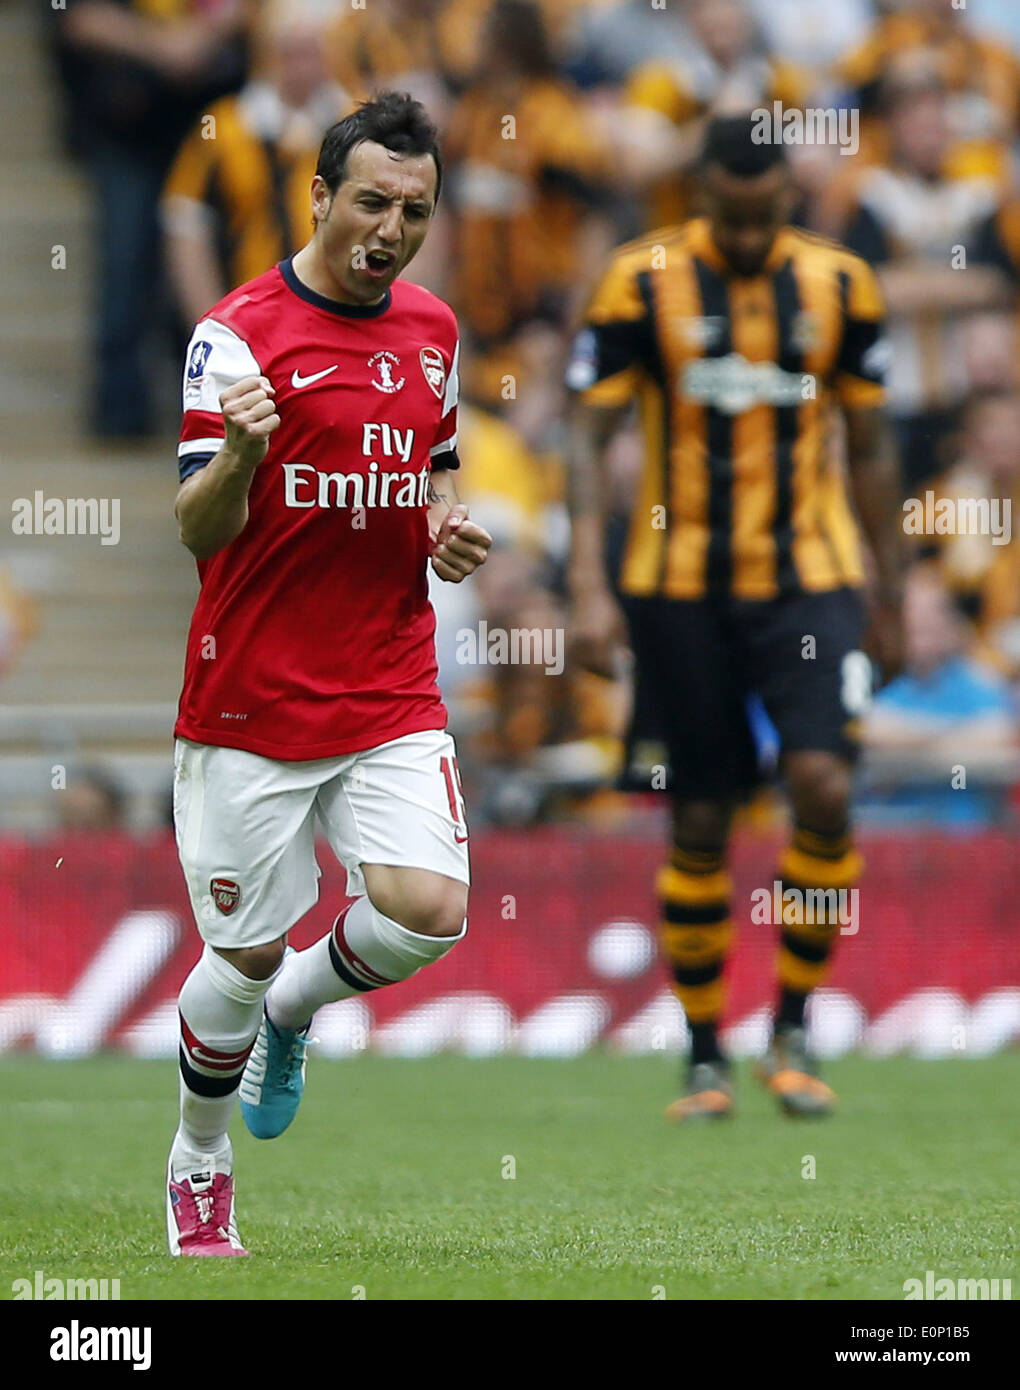 London, Britain. 17th May, 2014. Santi Cazorla (L) of Arsenal celebrates scoring during FA Cup final between Arsenal and Hull City at Wembley Stadium in London, Britain, on May 17, 2014. Arsenal ended nine-year wait for a trophy by beating Hull City with 3-2. Credit:  Wang Lili/Xinhua/Alamy Live News Stock Photo